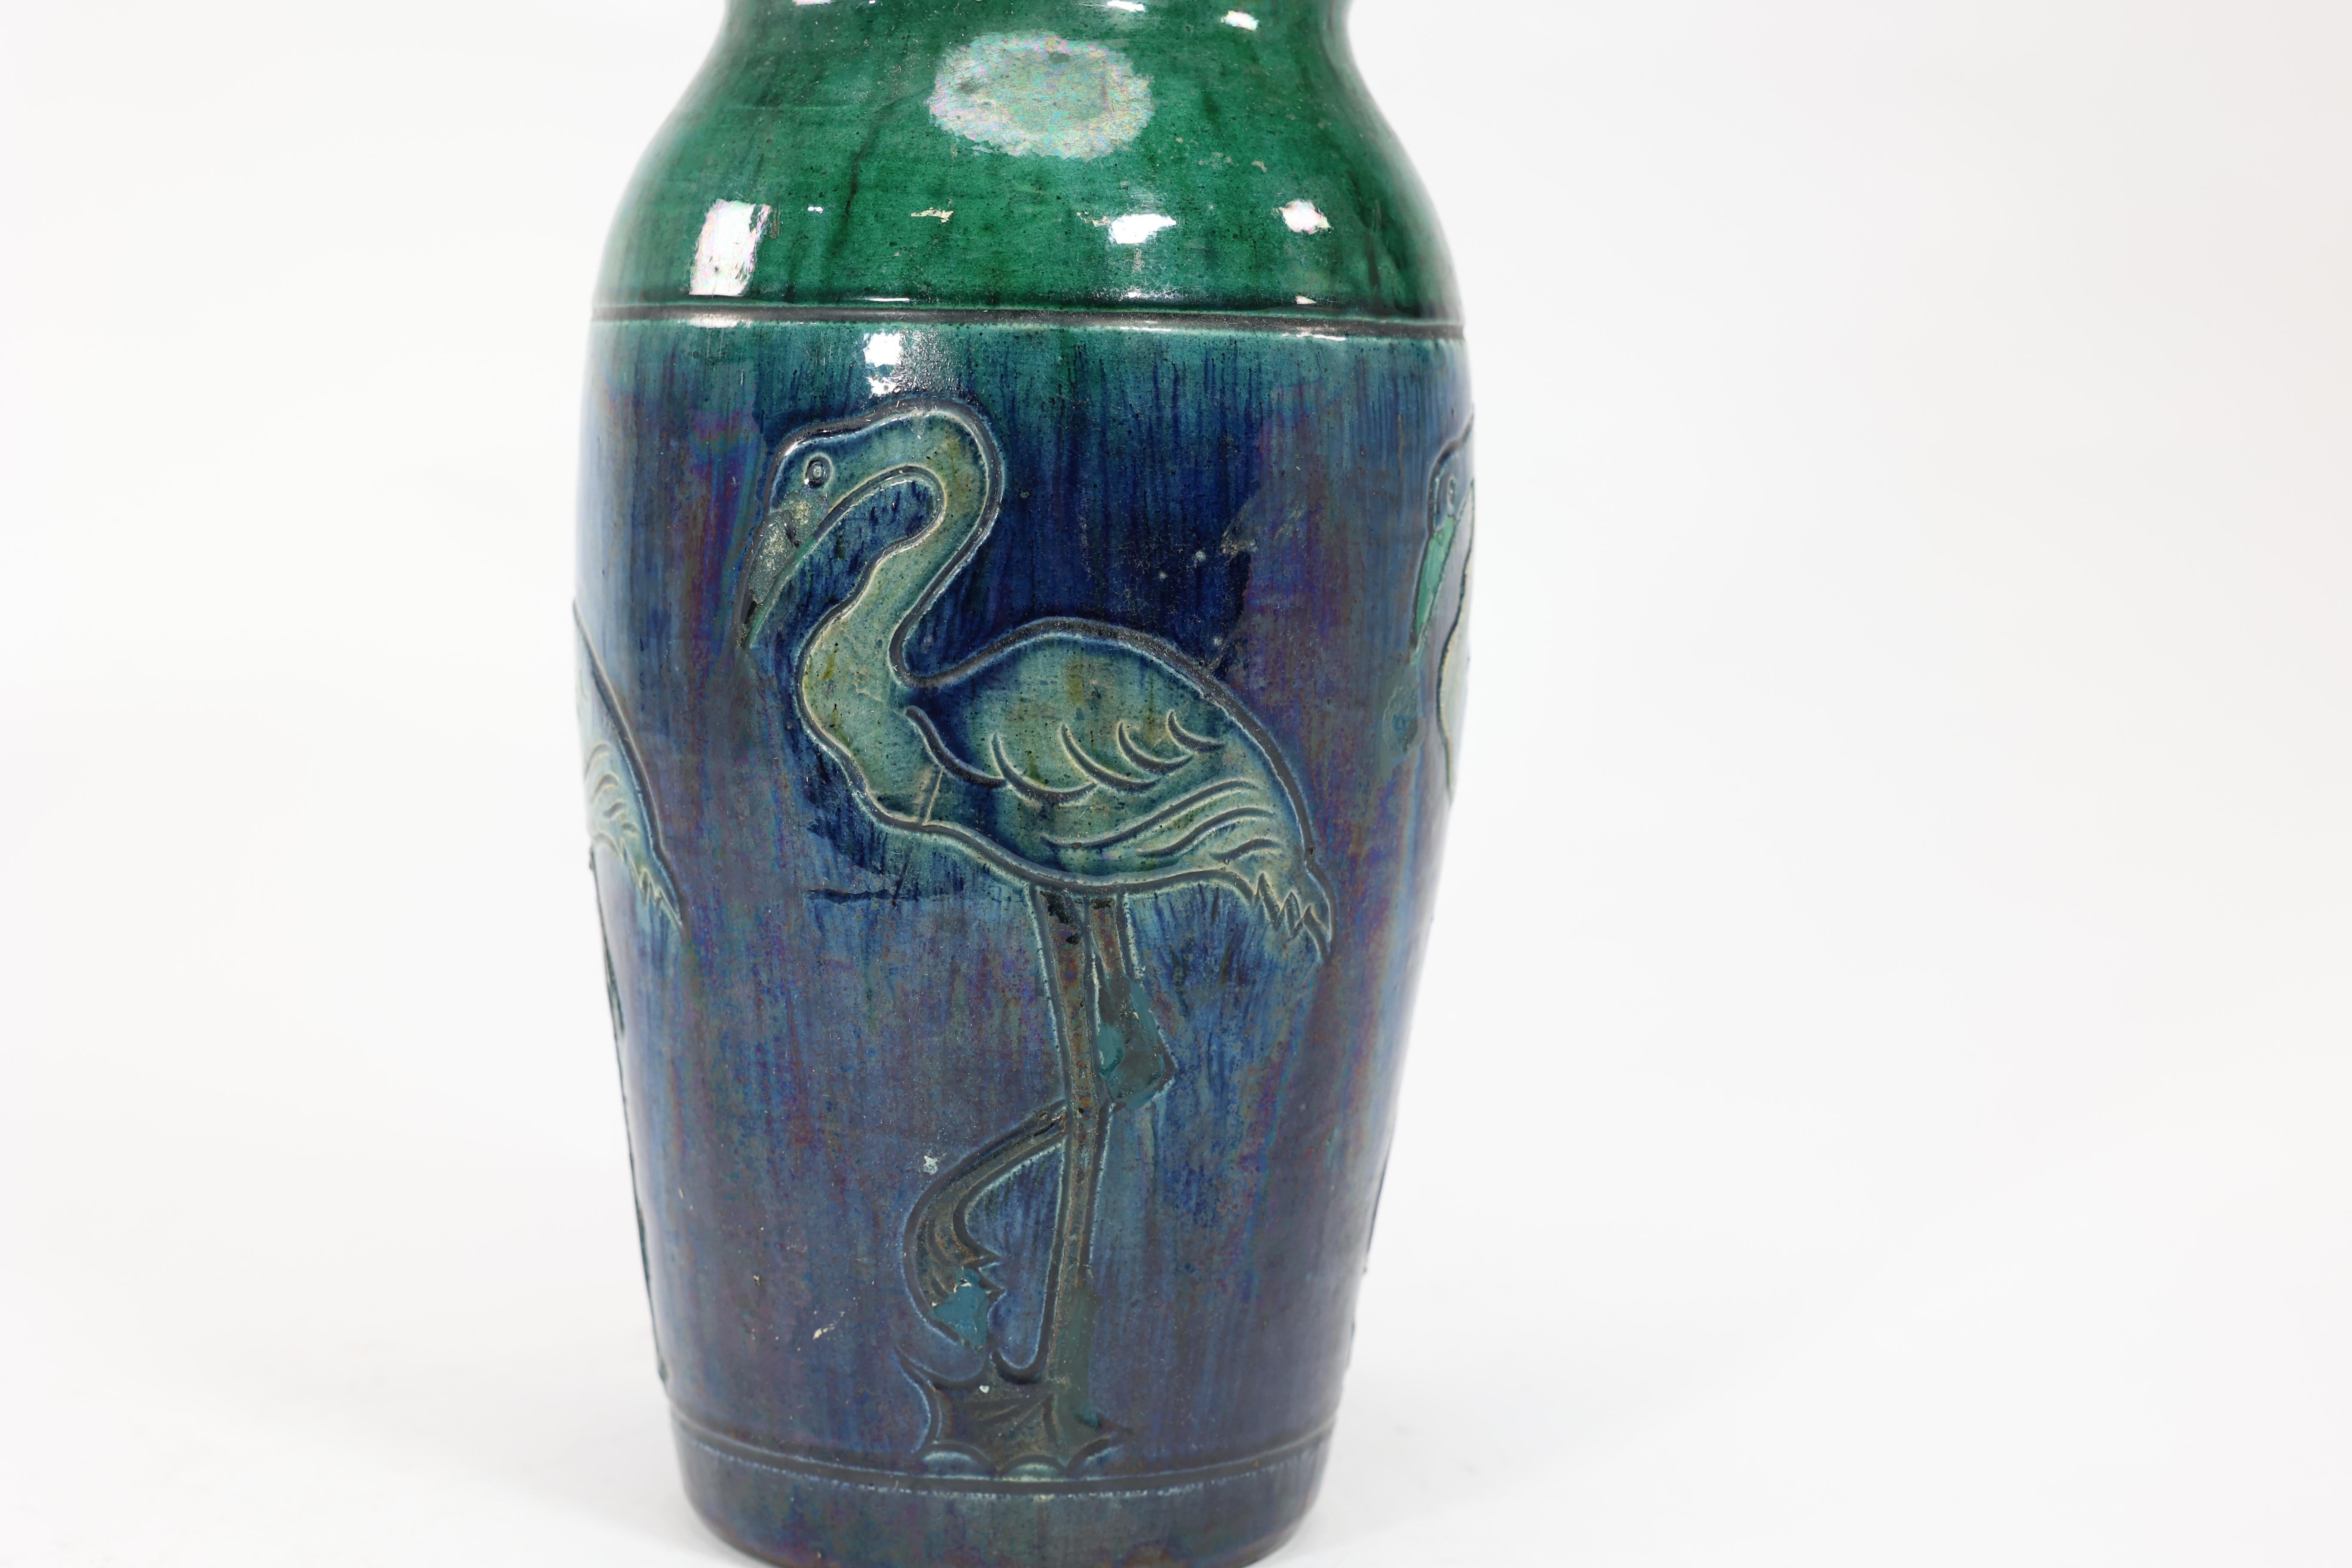 Belgian Belgium Art Pottery. Tall ceramic Arts & Crafts vase decorated with 5 Flamingos. For Sale